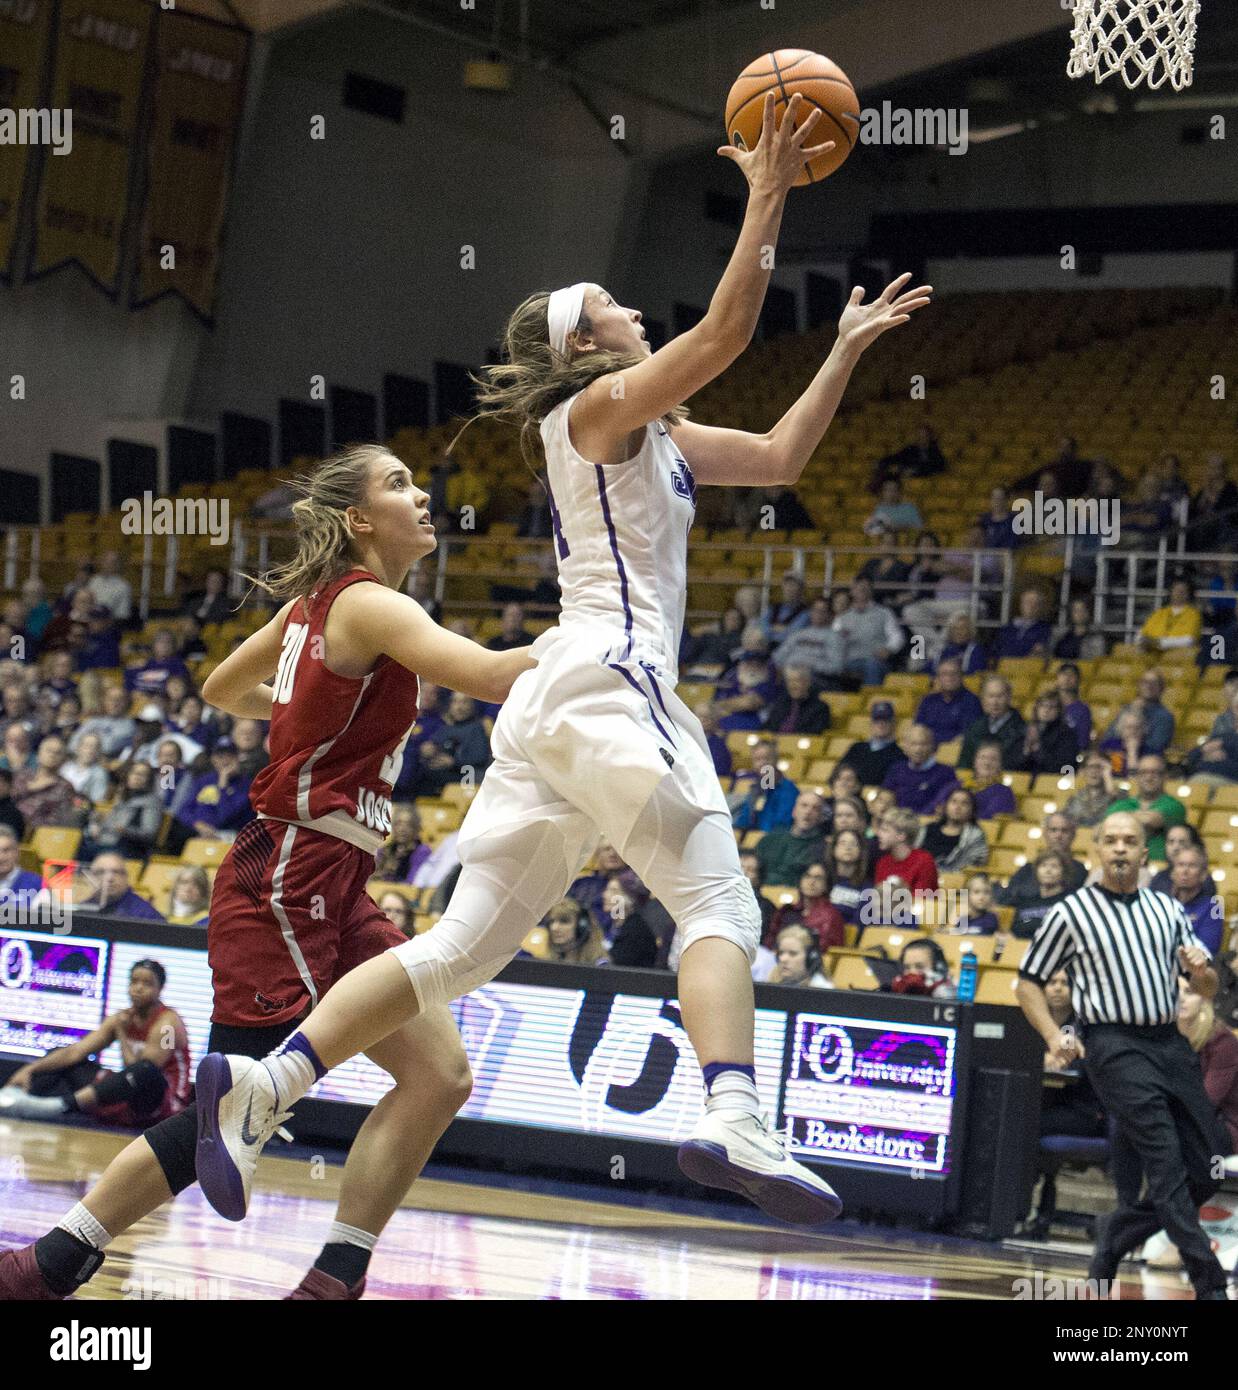 St. Joseph's Sarah Veilleux, left, chases James Madison's Hailee Barron as  she jumps for the basket during the second quarter of an NCAA college  basketball game in Harrisonburg, Va., Sunday, Nov. 19,